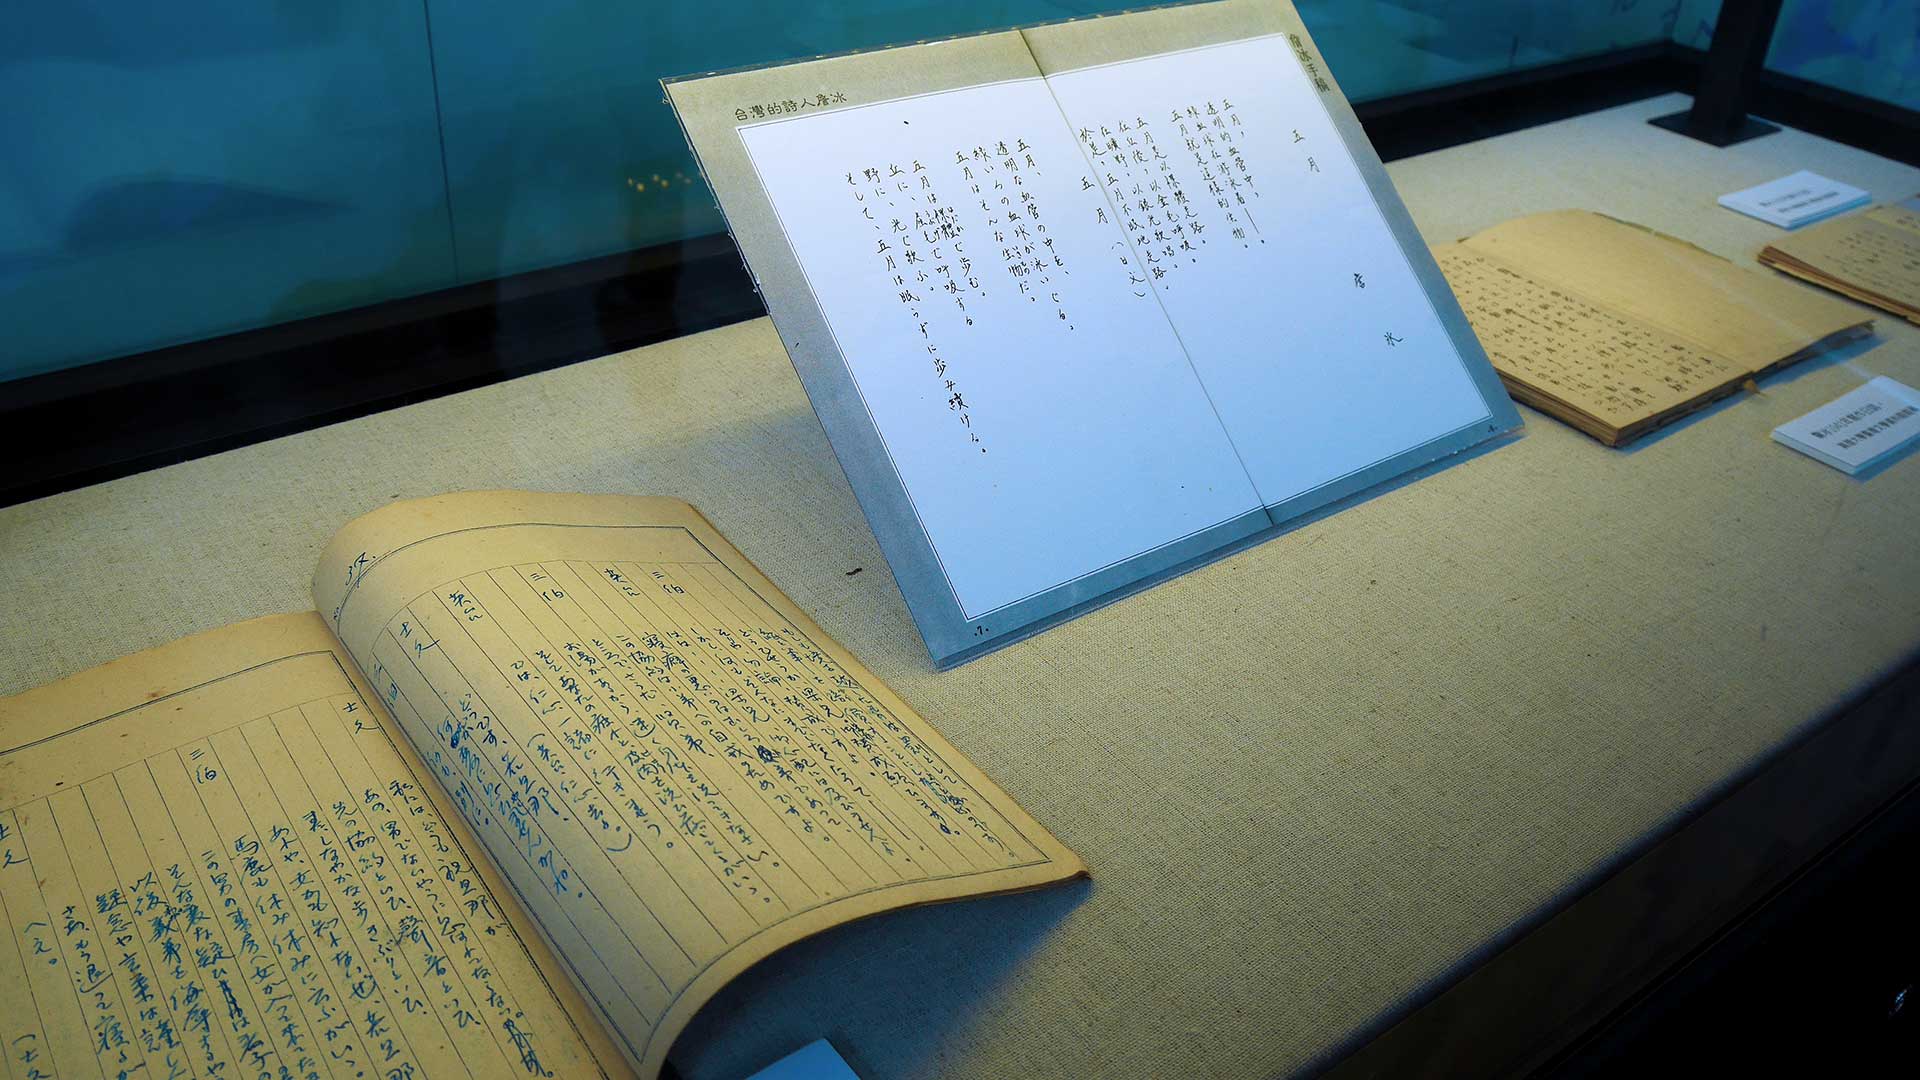 (The manuscript duplicates of May and a handwritten manuscript of the poem “Butterfly Lovers in Taiwan”).